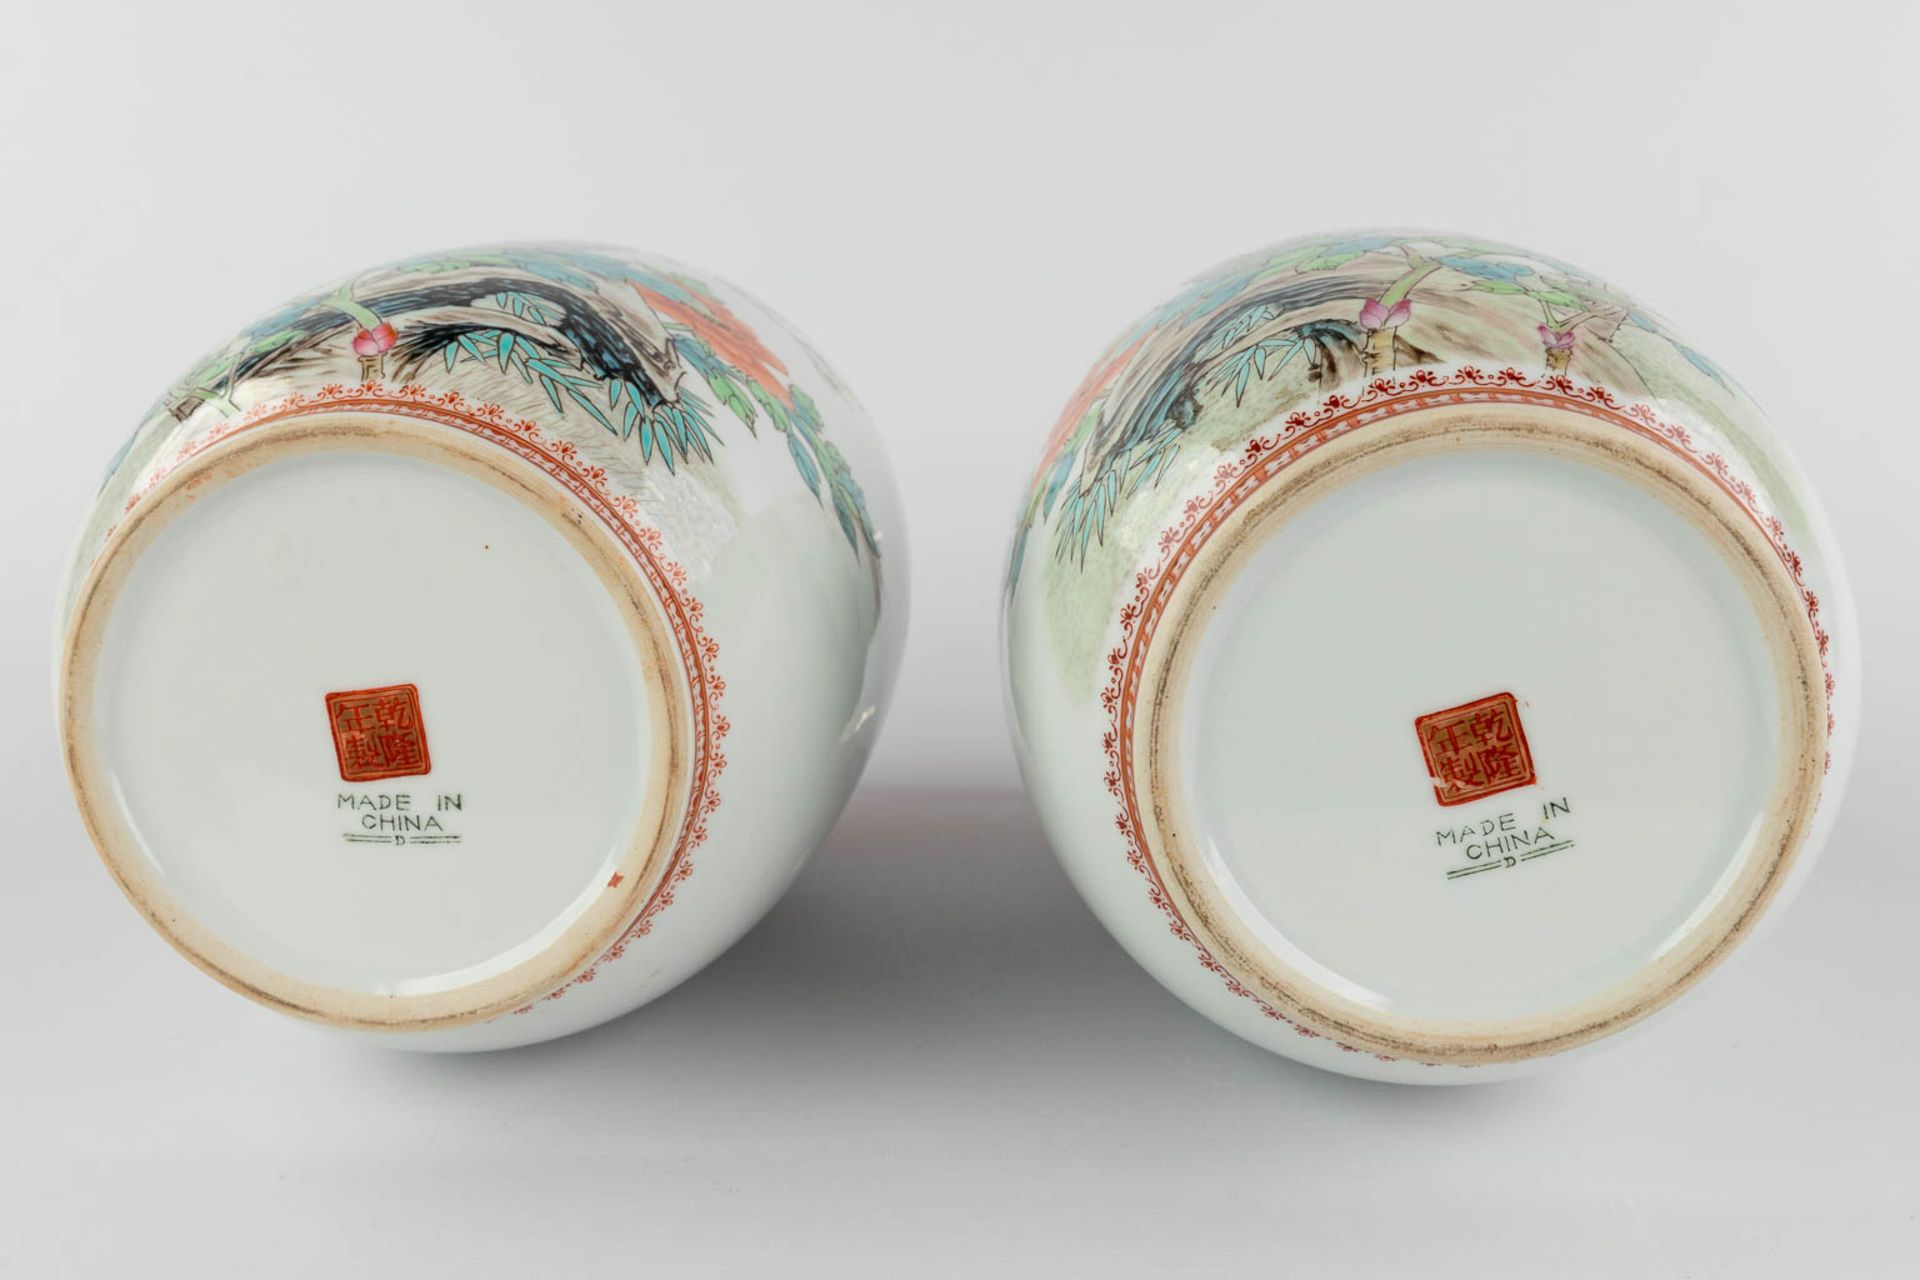 A pair of Chinese vases with bird decor, spring blossoms and peonies. 20th C. (H:32 x D:18 cm) - Image 11 of 12